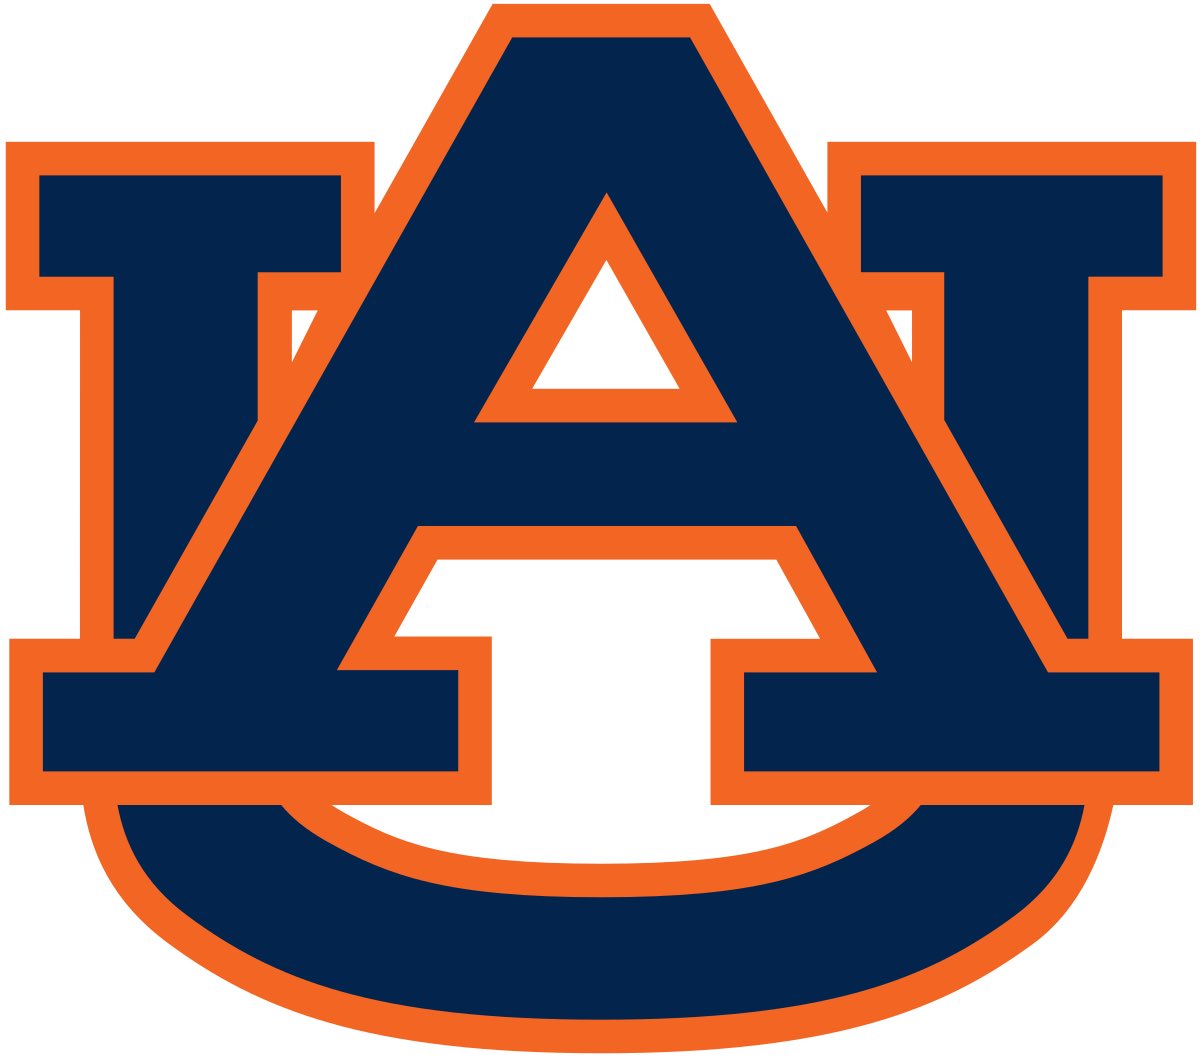 #AGTG @AuburnFootball has given me an offer! Thank you @CoachJesseStone for visiting @OC_Knights_FB today. See you again soon. @lacheltqba @CoachHughFreeze @247Sports @On3sports @Rivals